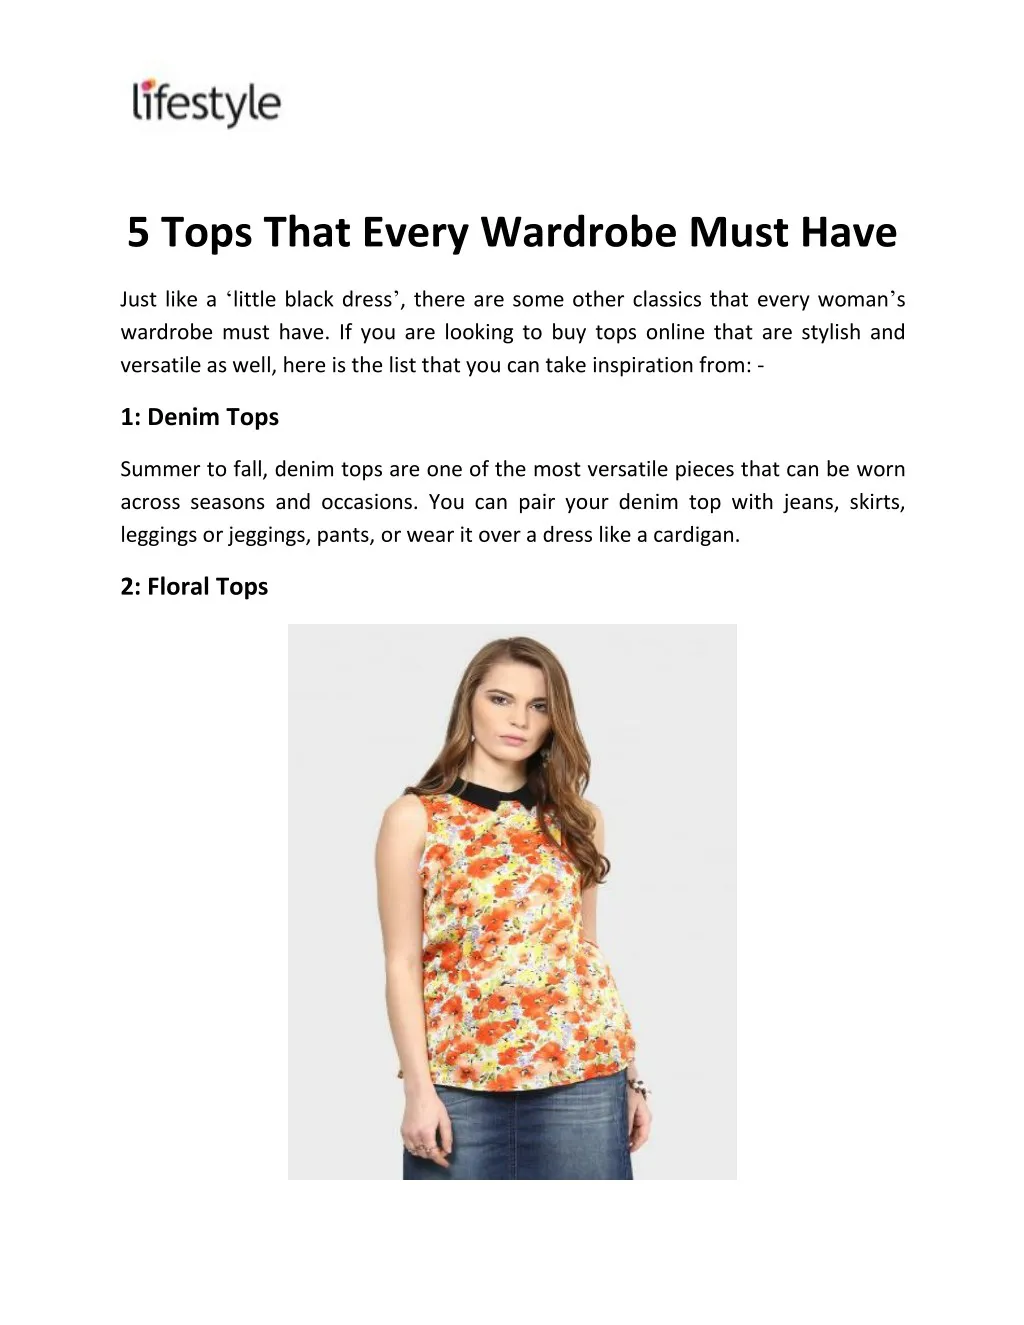 5 tops that every wardrobe must have